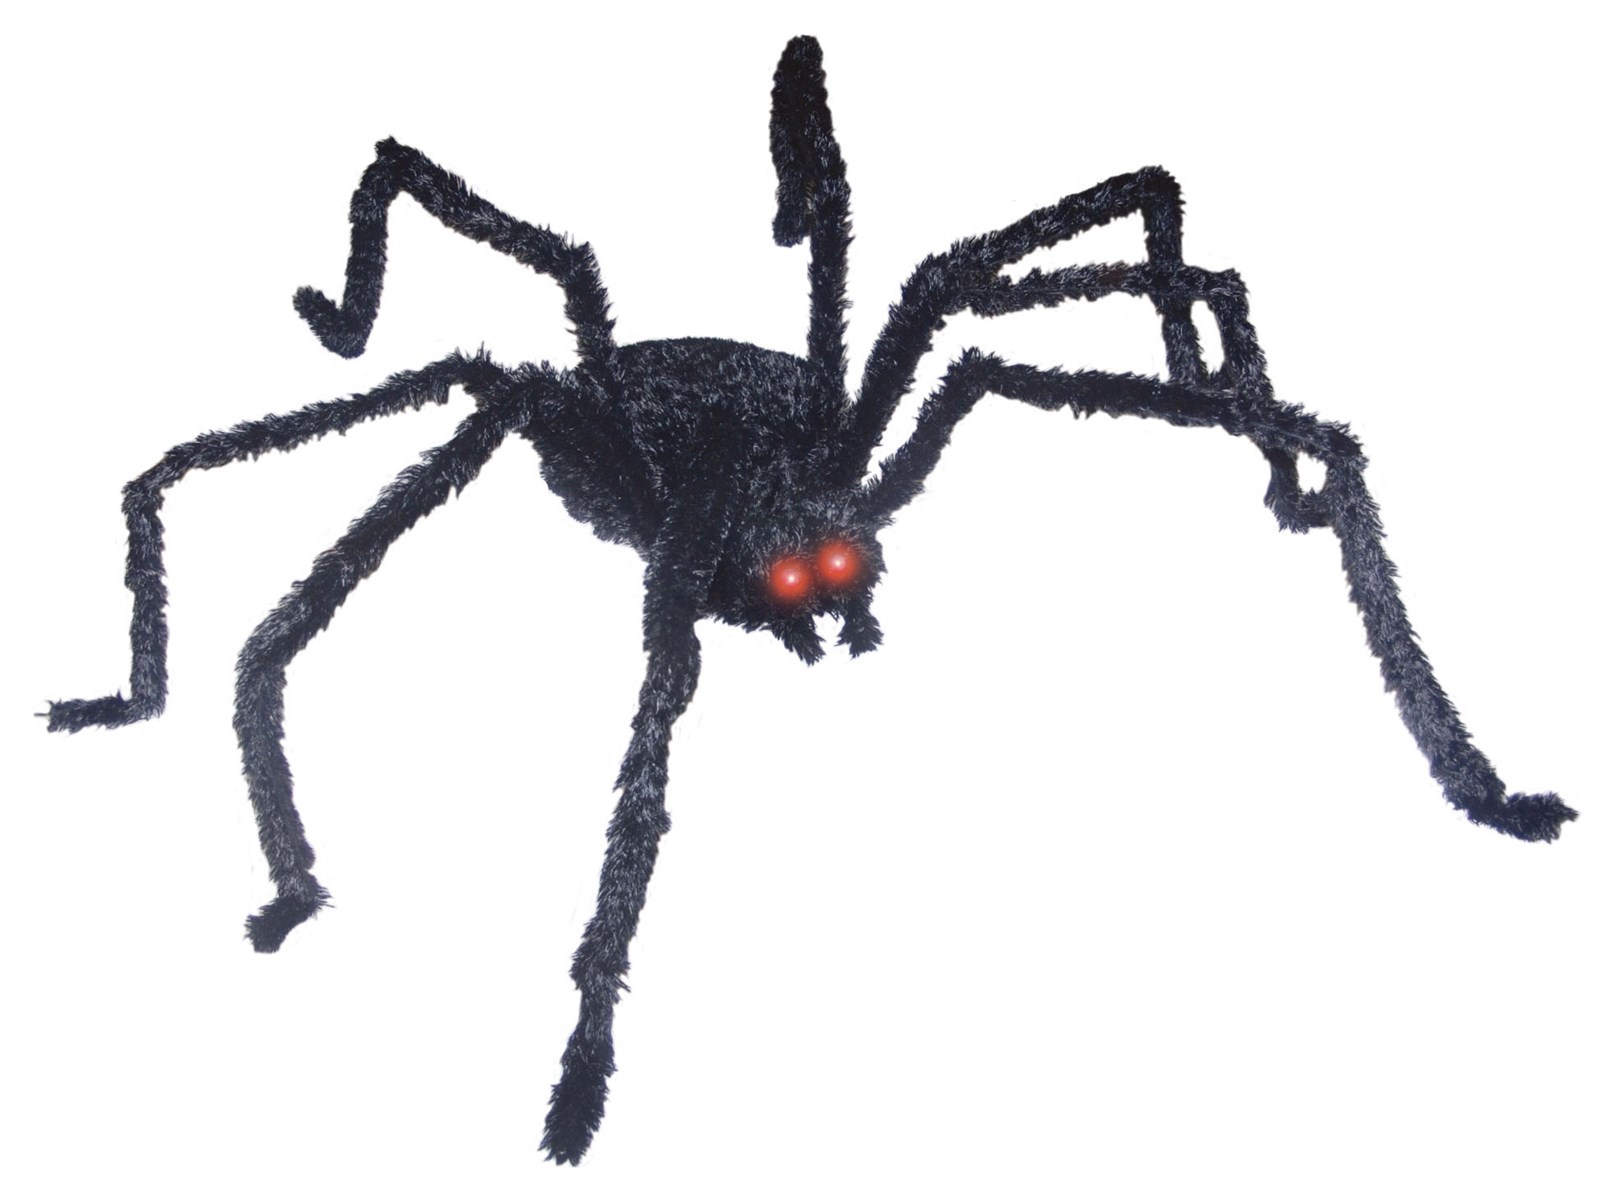 Long Hair Black Spider with Light Up Eyes